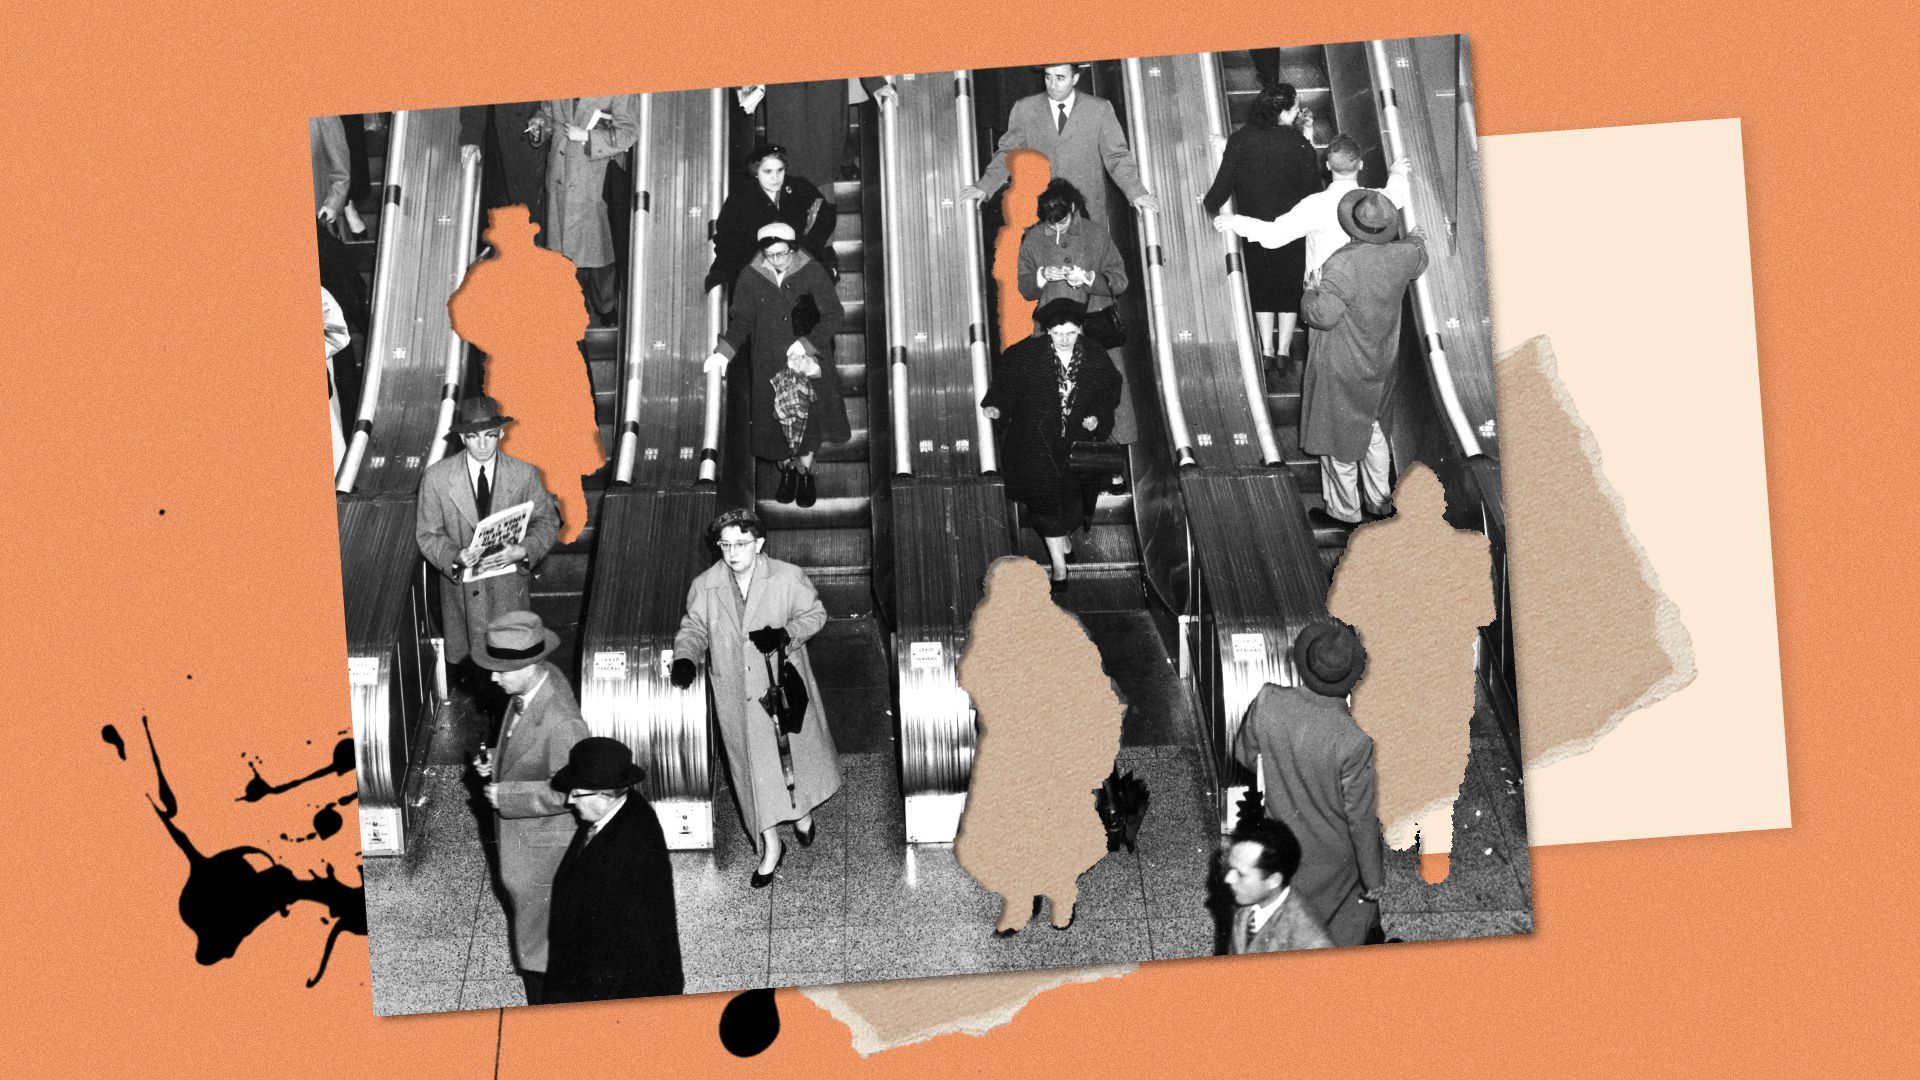 Photo illustration of an old photograph of people on an escalator with some people cut out